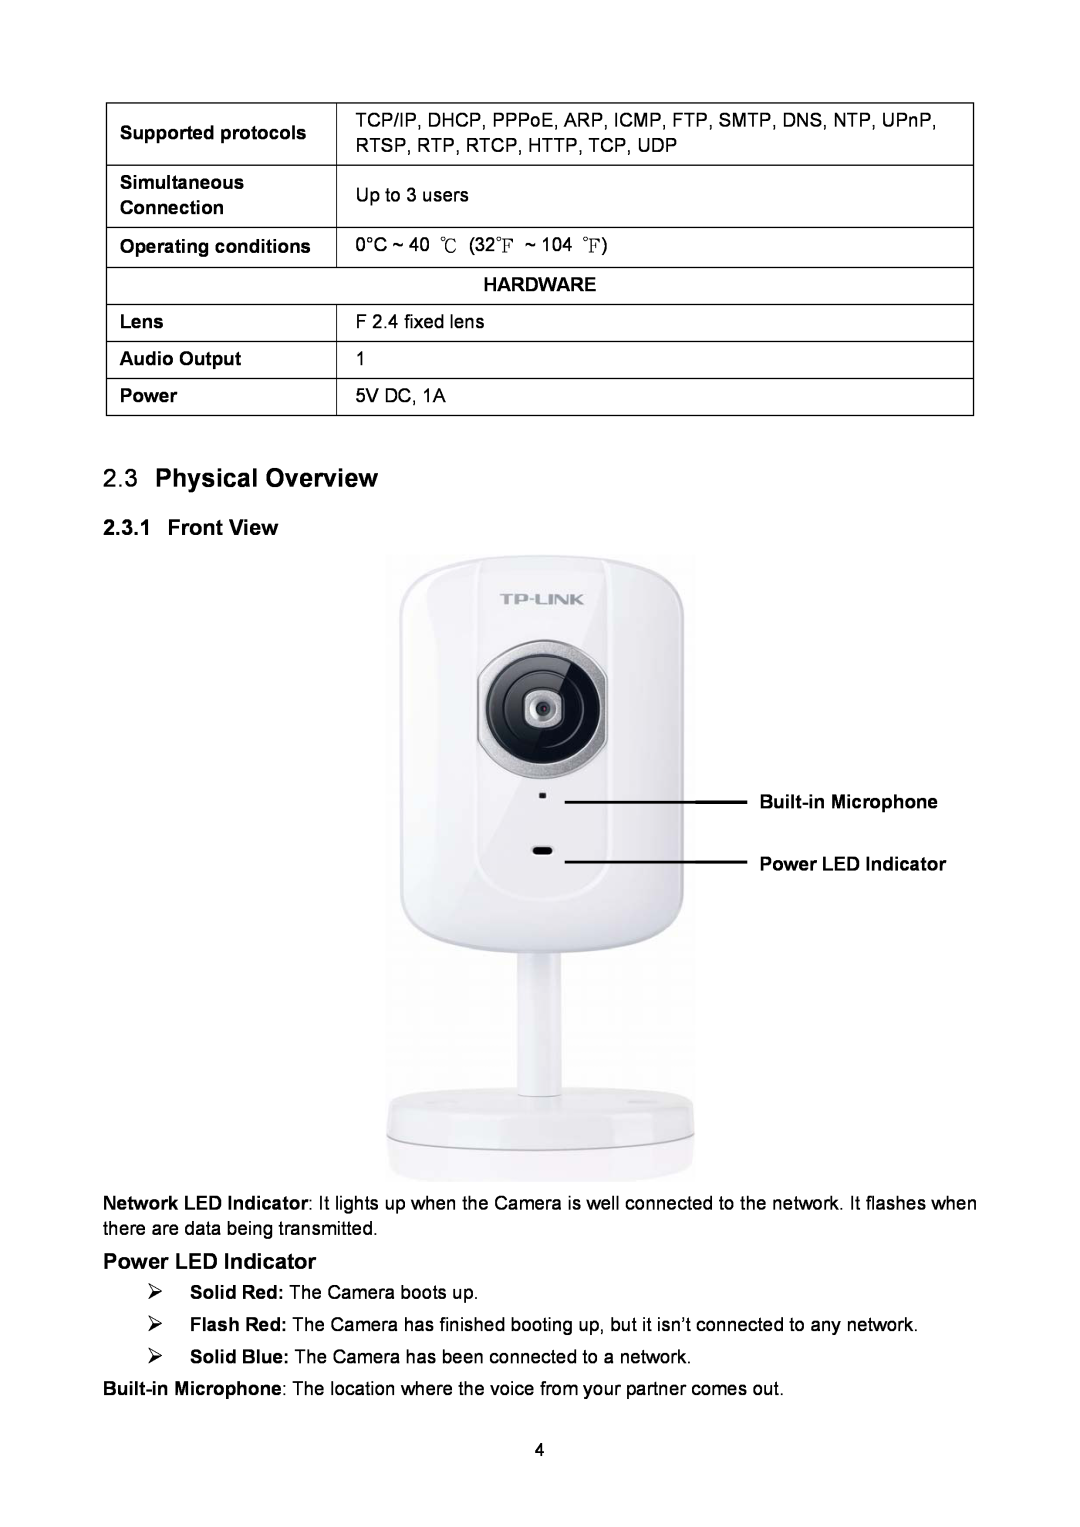 TP-Link TL-SC2020 manual Physical Overview, Front View, Power LED Indicator 